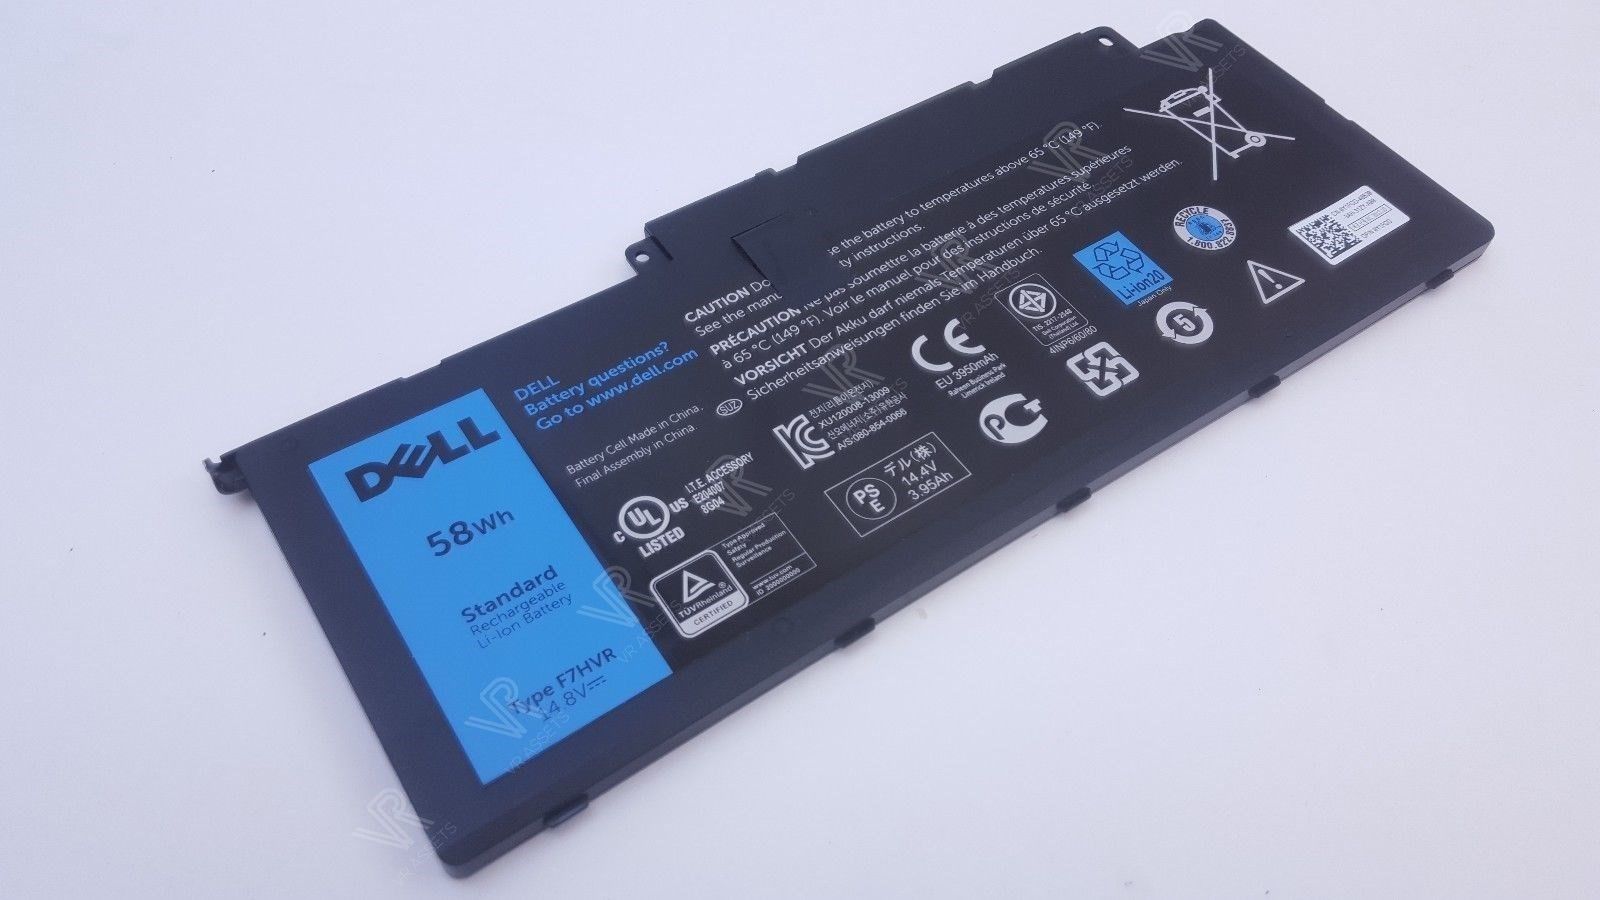 GENUINE Dell Inspiron 7537 7737 Laptop Battery Y1FGD 0Y1FGD Type XCMRD